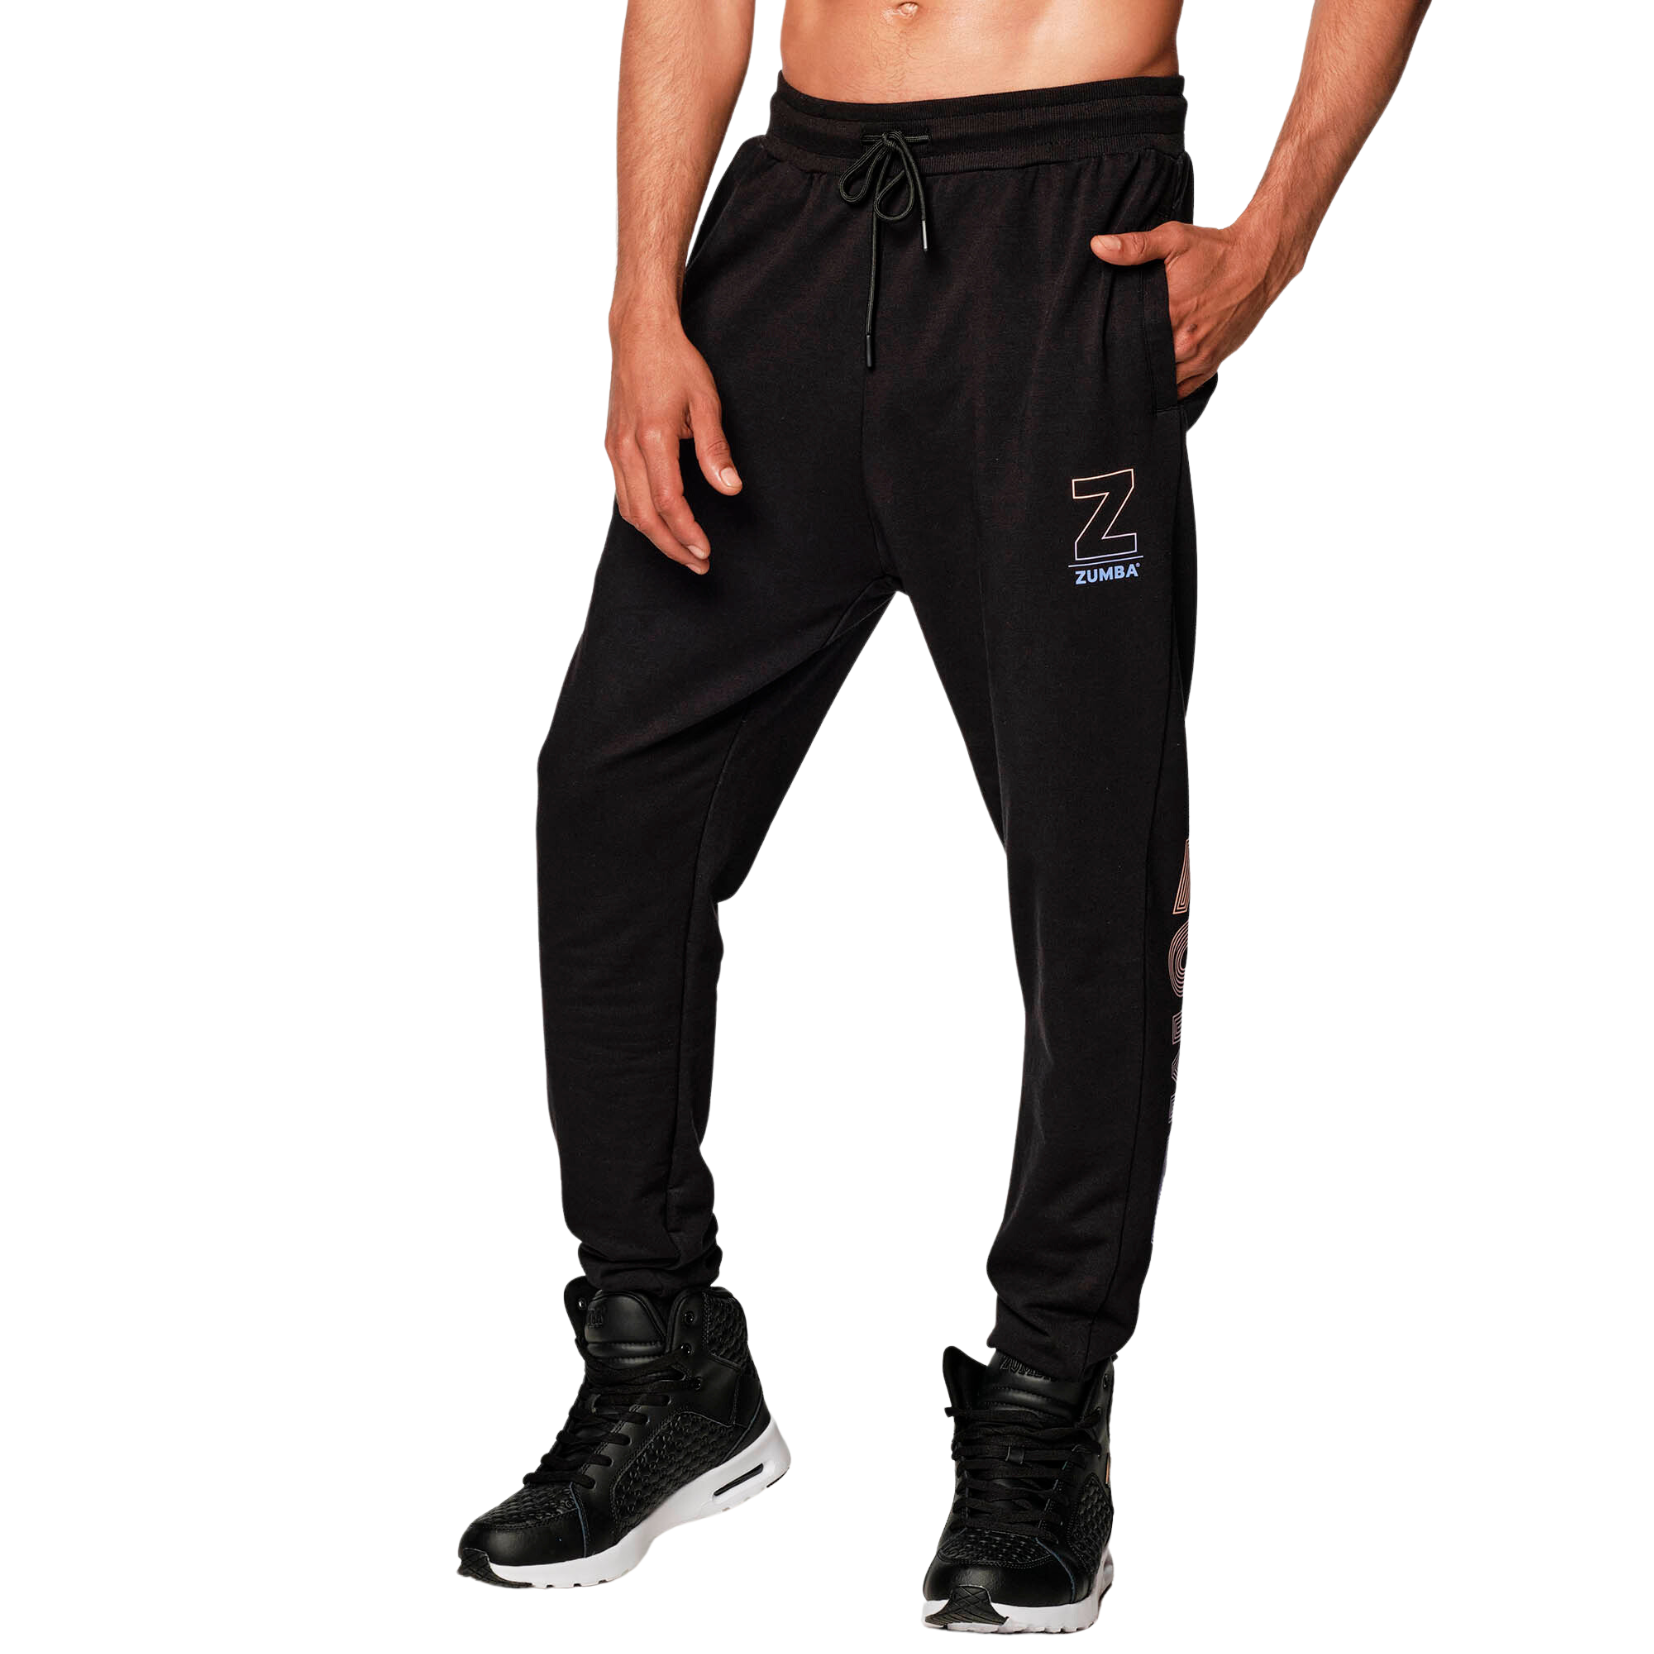 Zumba Roller Derby Team Joggers (Special Order)